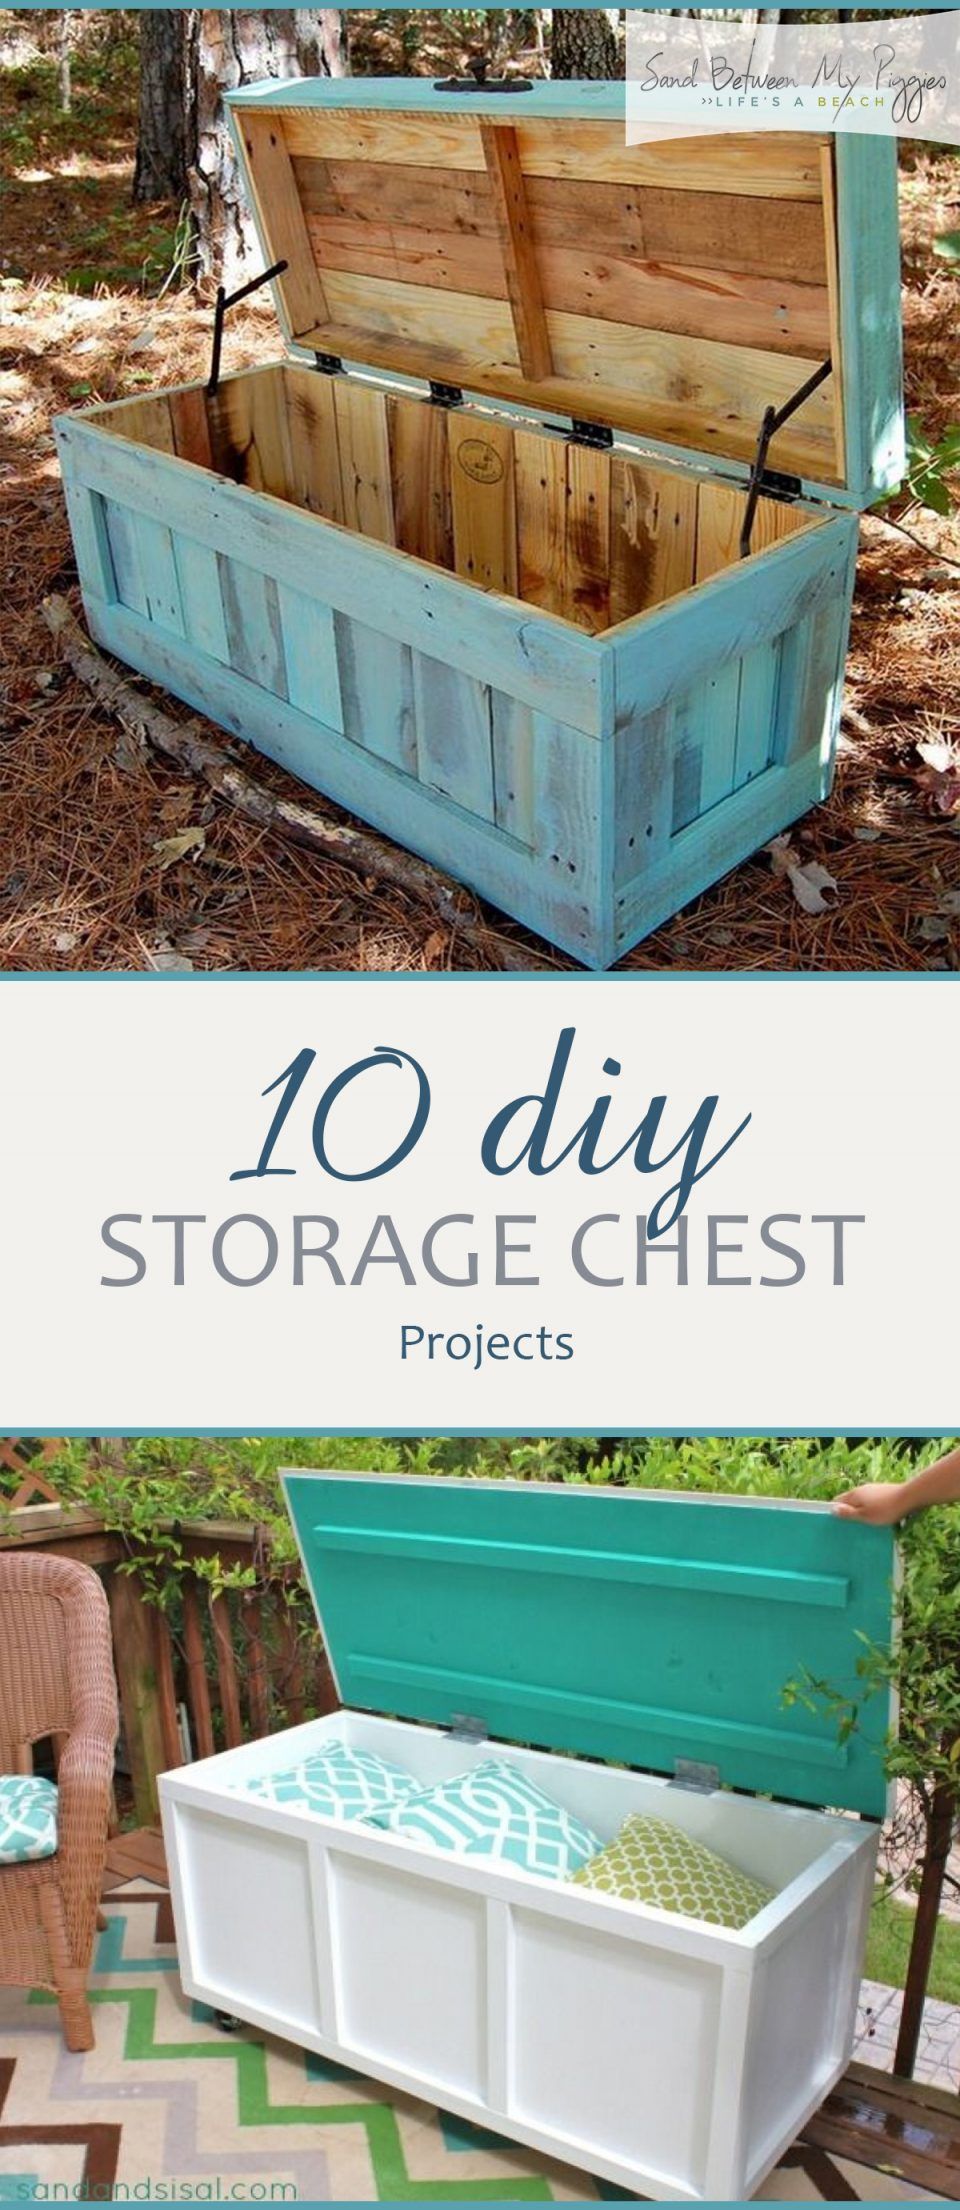 10 DIY Storage Chest Projects | Sand Between My Piggies- Beach Vacations and Travel - all things Beach - 10 DIY Storage Chest Projects | Sand Between My Piggies- Beach Vacations and Travel - all things Beach -   16 diy Wood chest ideas